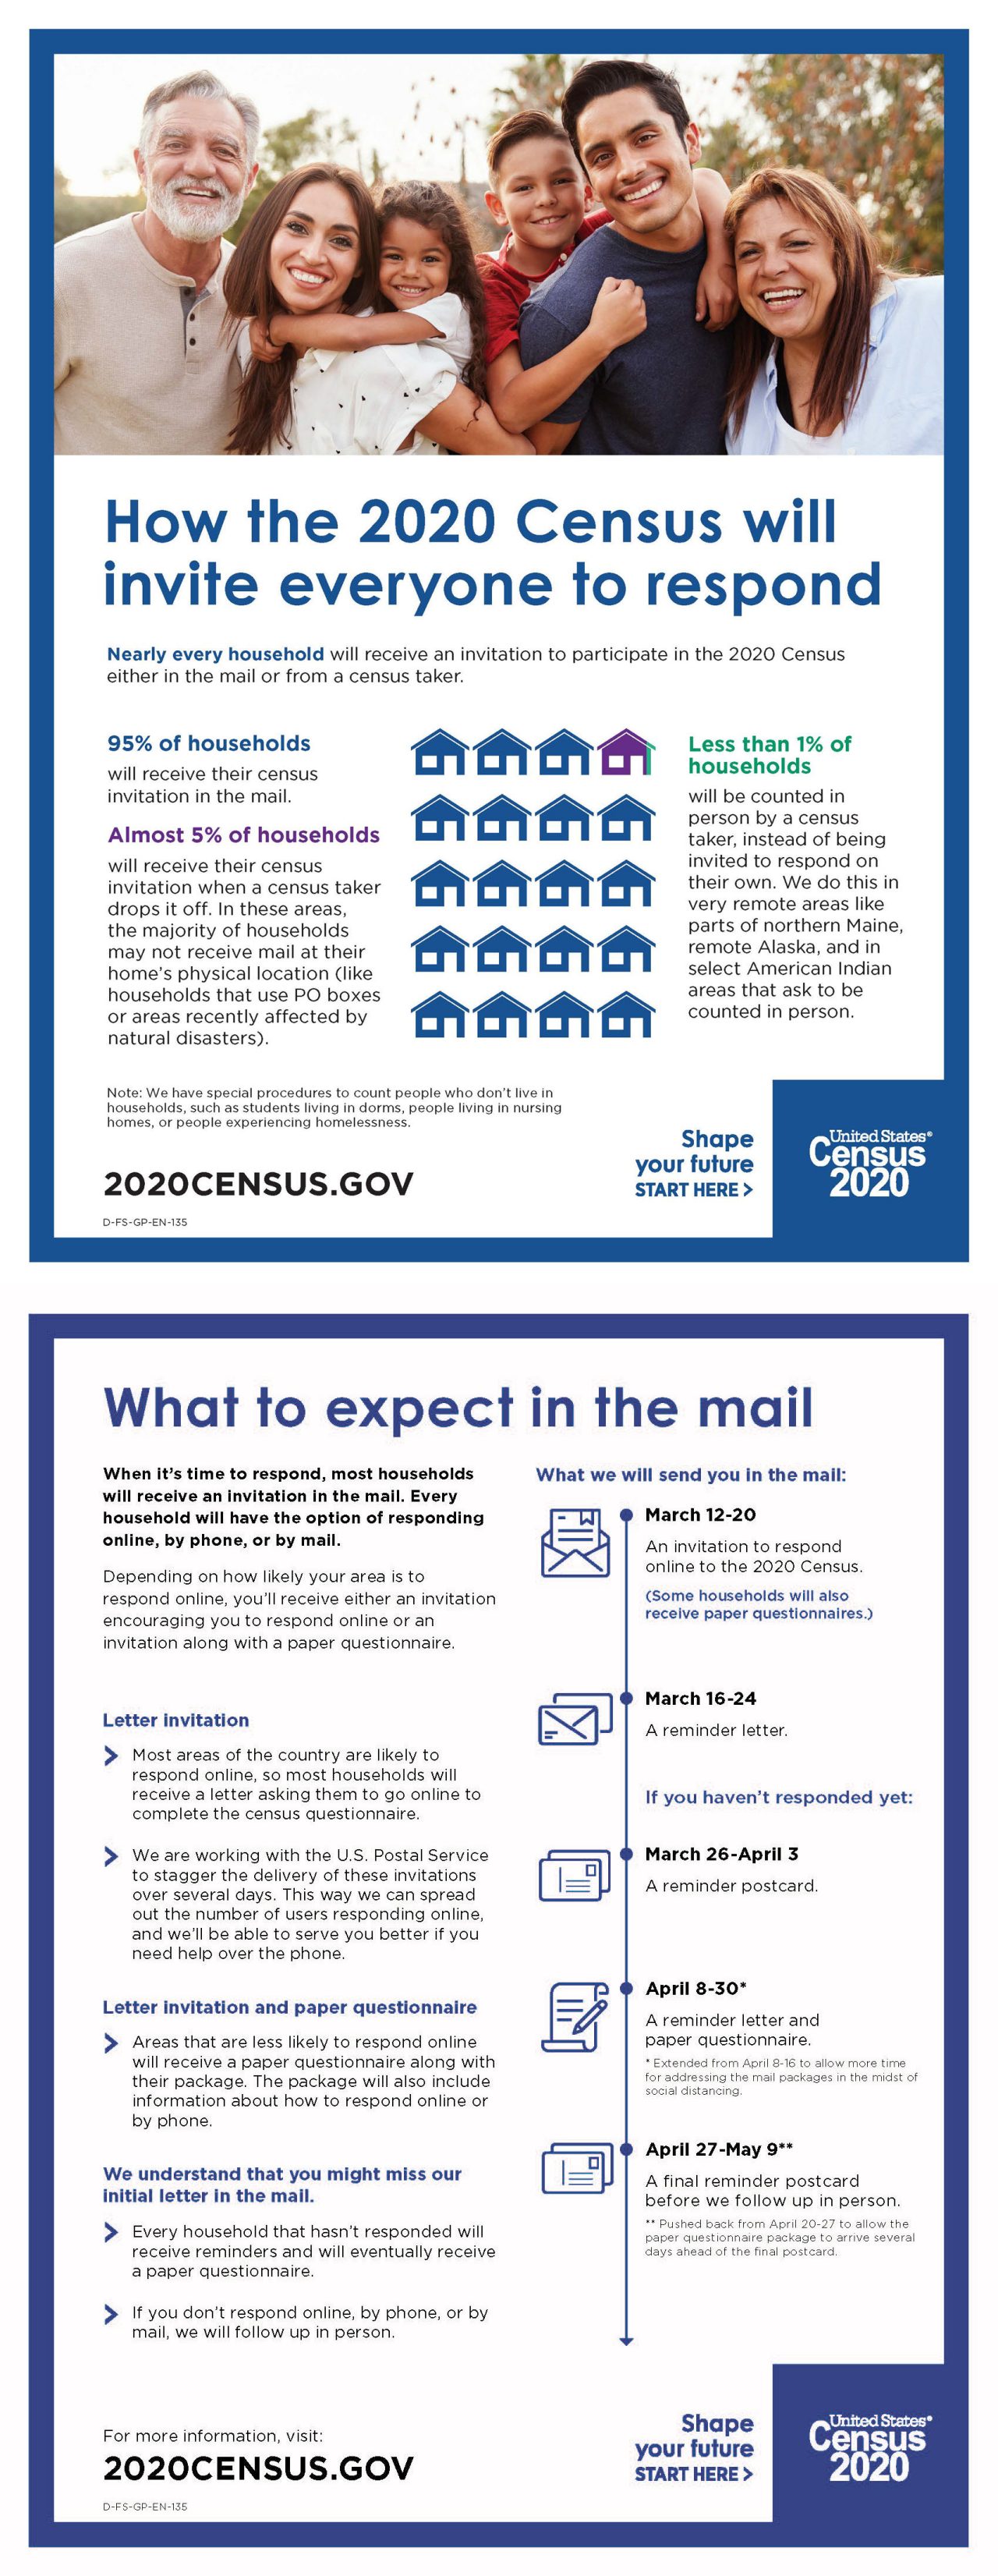 How the 2020 Census will invite everyone to respond (Full document)